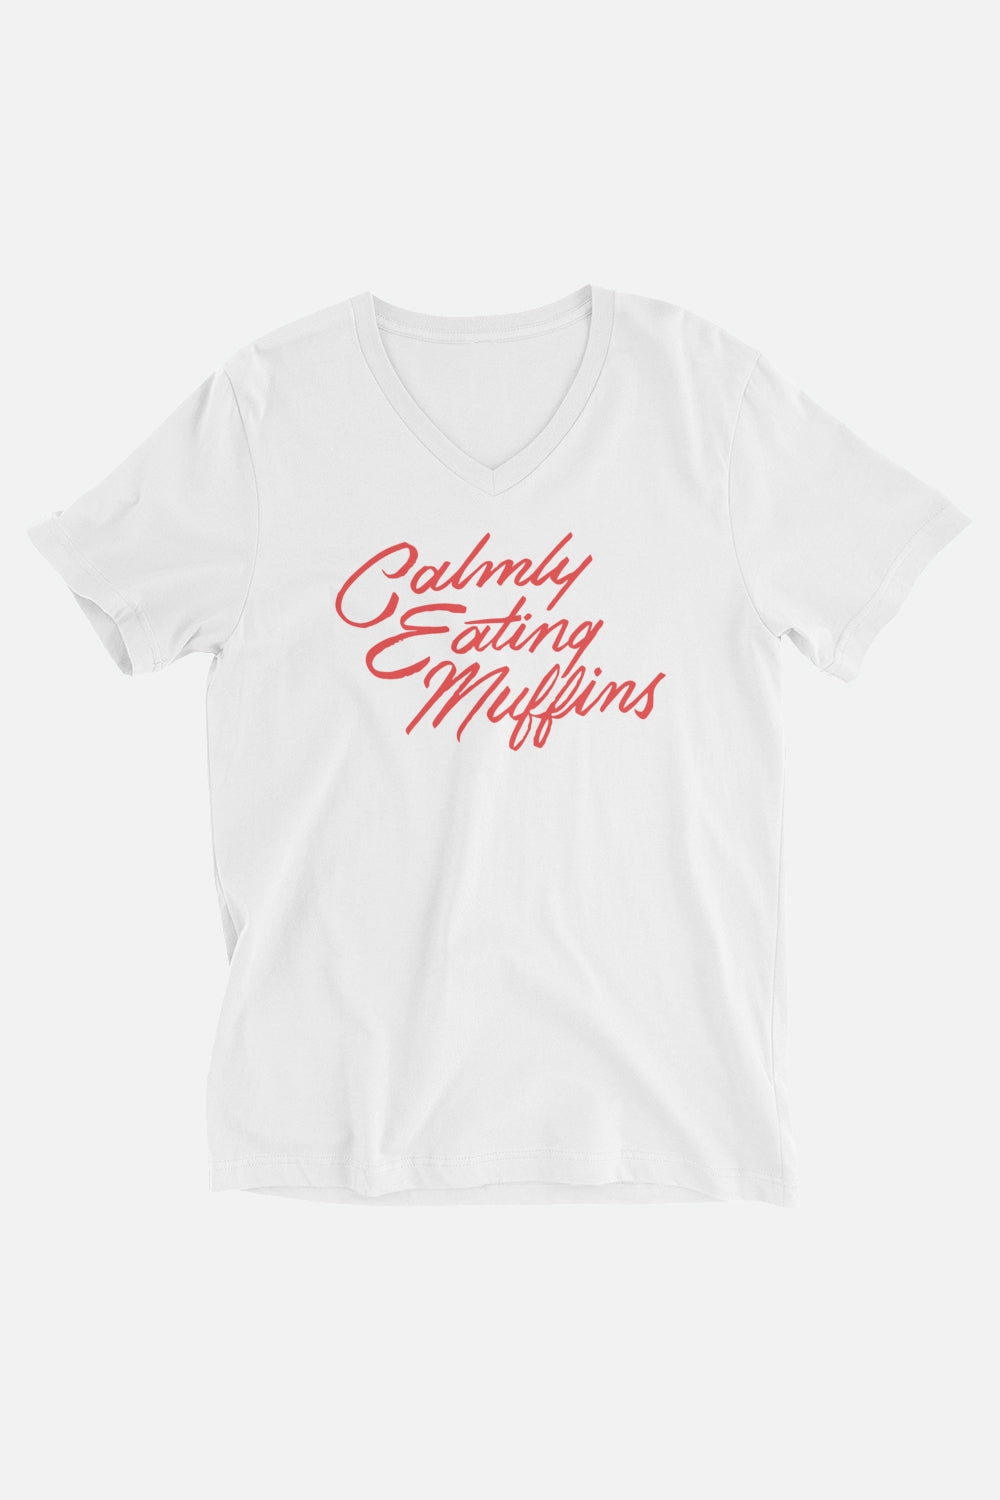 Calmly Eating Muffins Unisex V-Neck T-Shirt | The Importance of Being Earnest